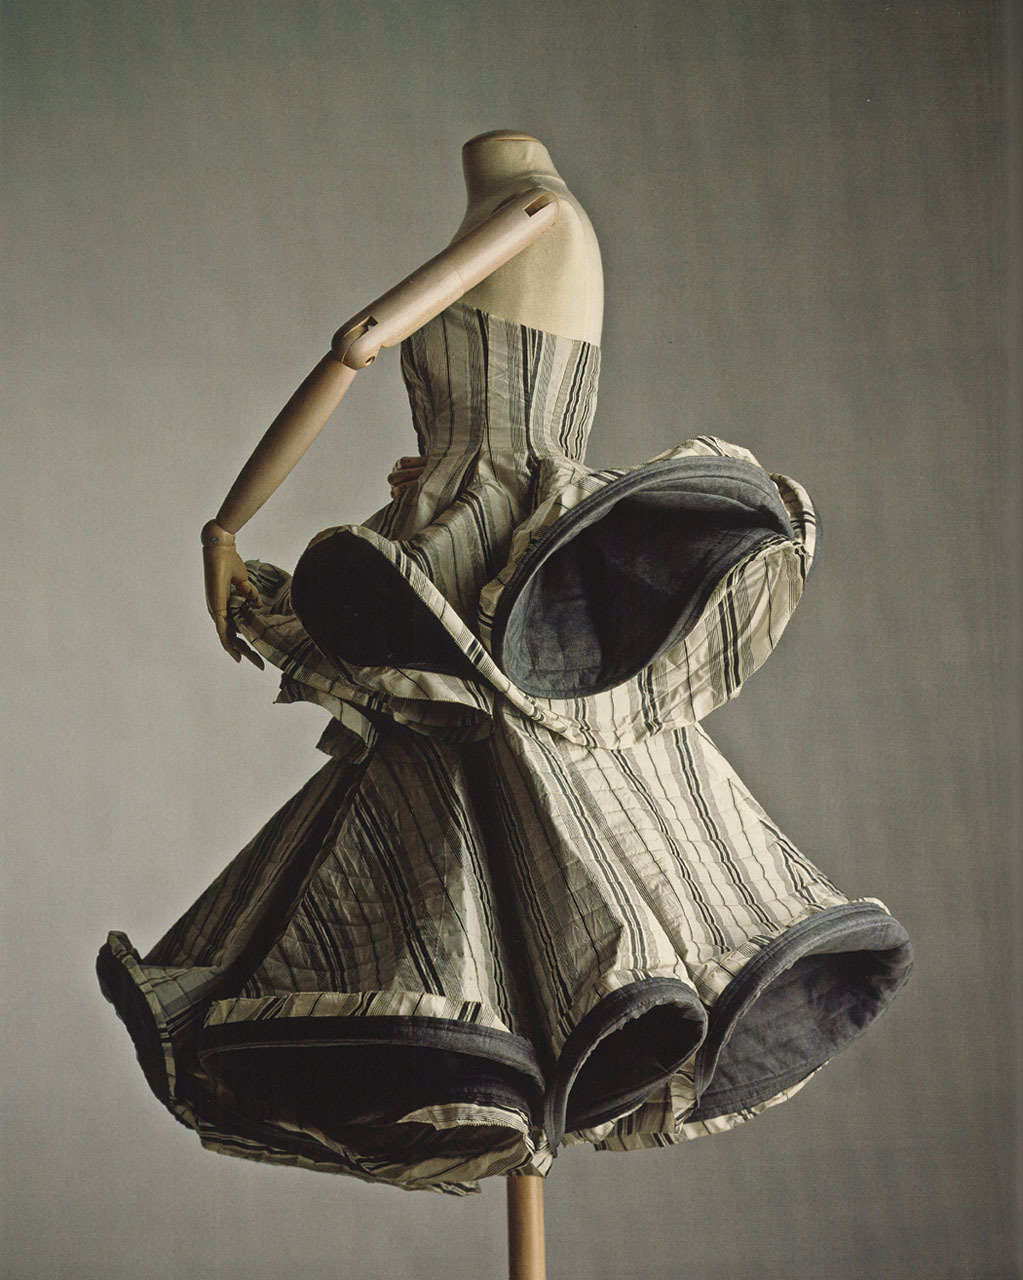 Yohji Yamamoto, crinolated dress from the “Wedding” collection, Spring–Summer 1999.
Collection of Allen Sui
Photography: William Palmer
Convergence and Divergence
Formalism And Revolution: Rei Kawakubo and Yohji Yamamoto by Patricia Mears
Japan Fashion Now
Published in association with The Museum at the Fashion Institute of Technology, New York
(via cotonblanc:)